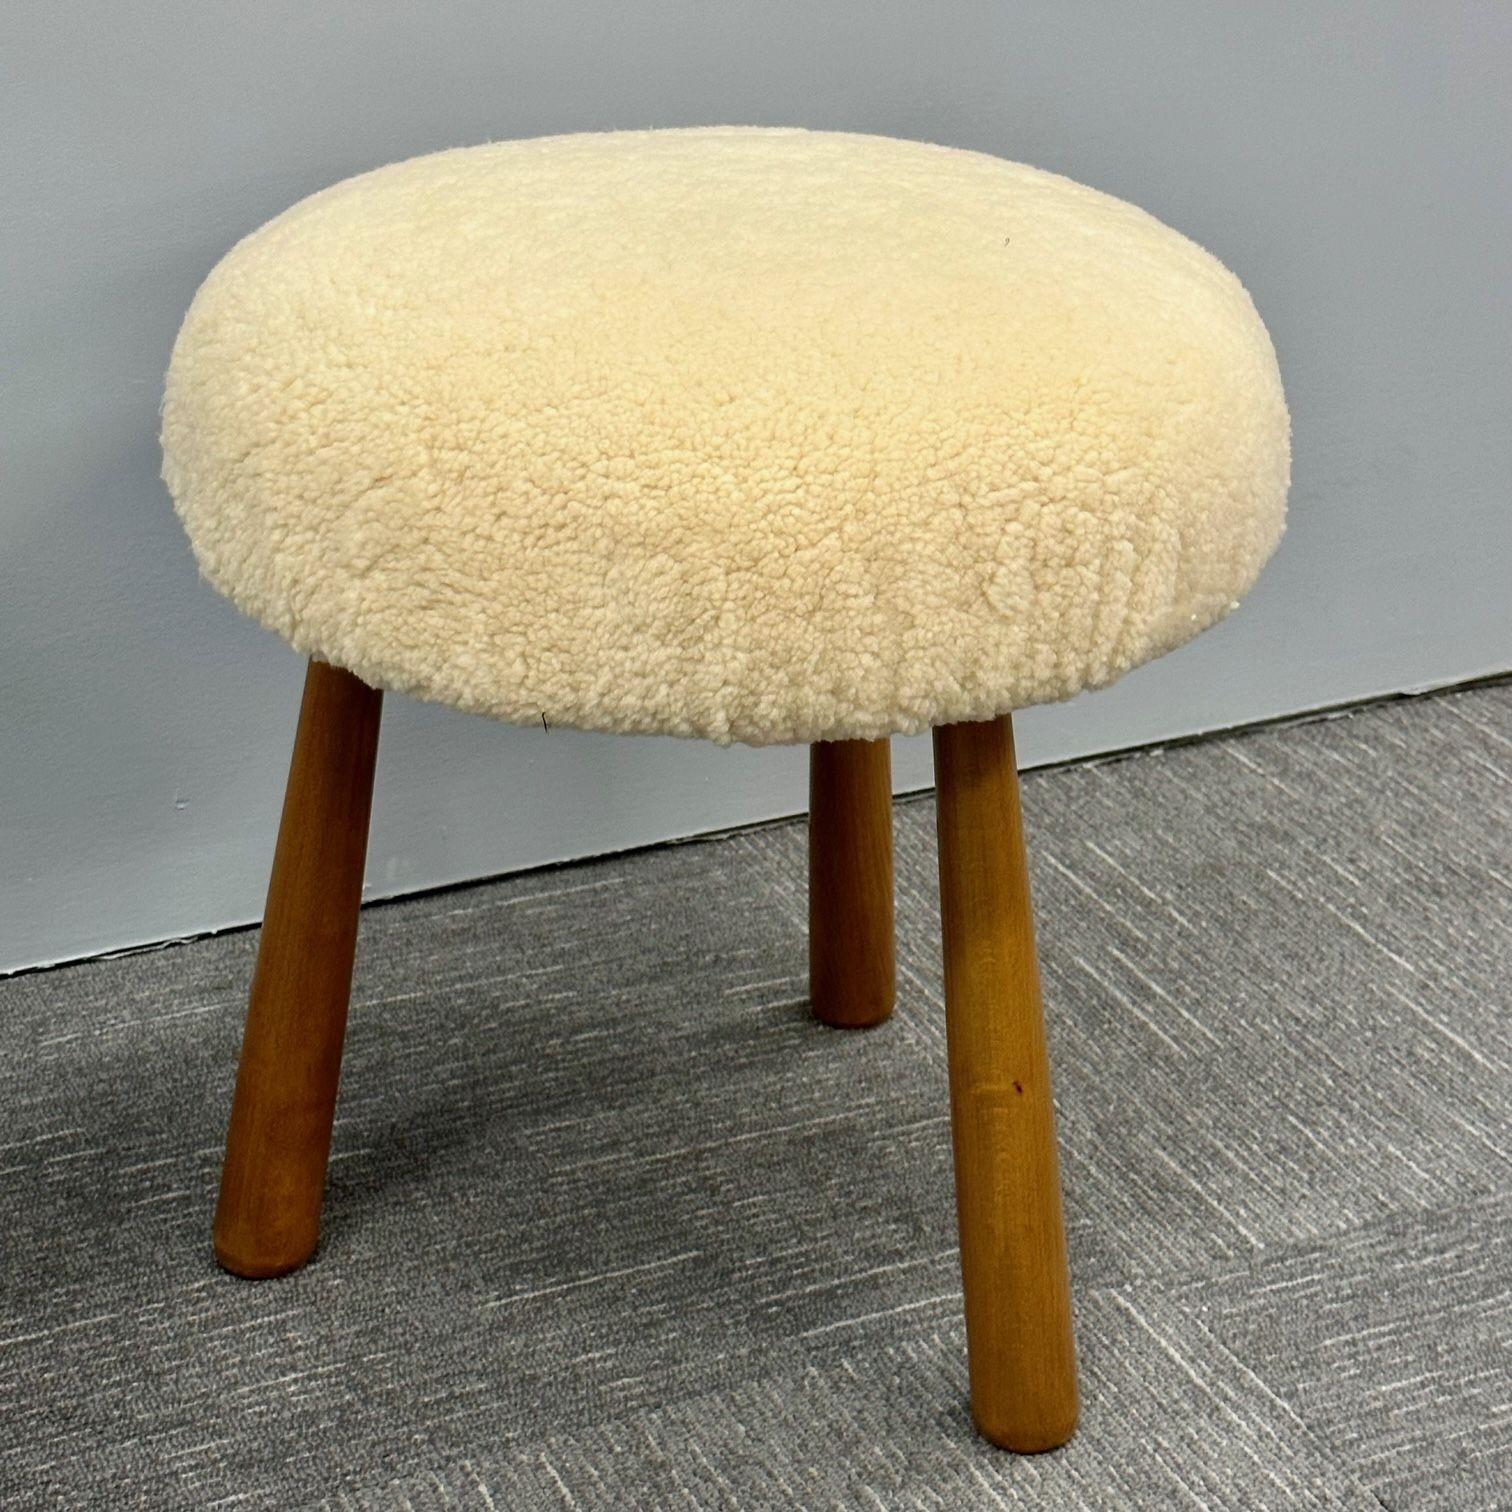 Pair Contemporary Swedish Modern Style Sheepskin Footstools / Ottomans, Beige In New Condition For Sale In Stamford, CT